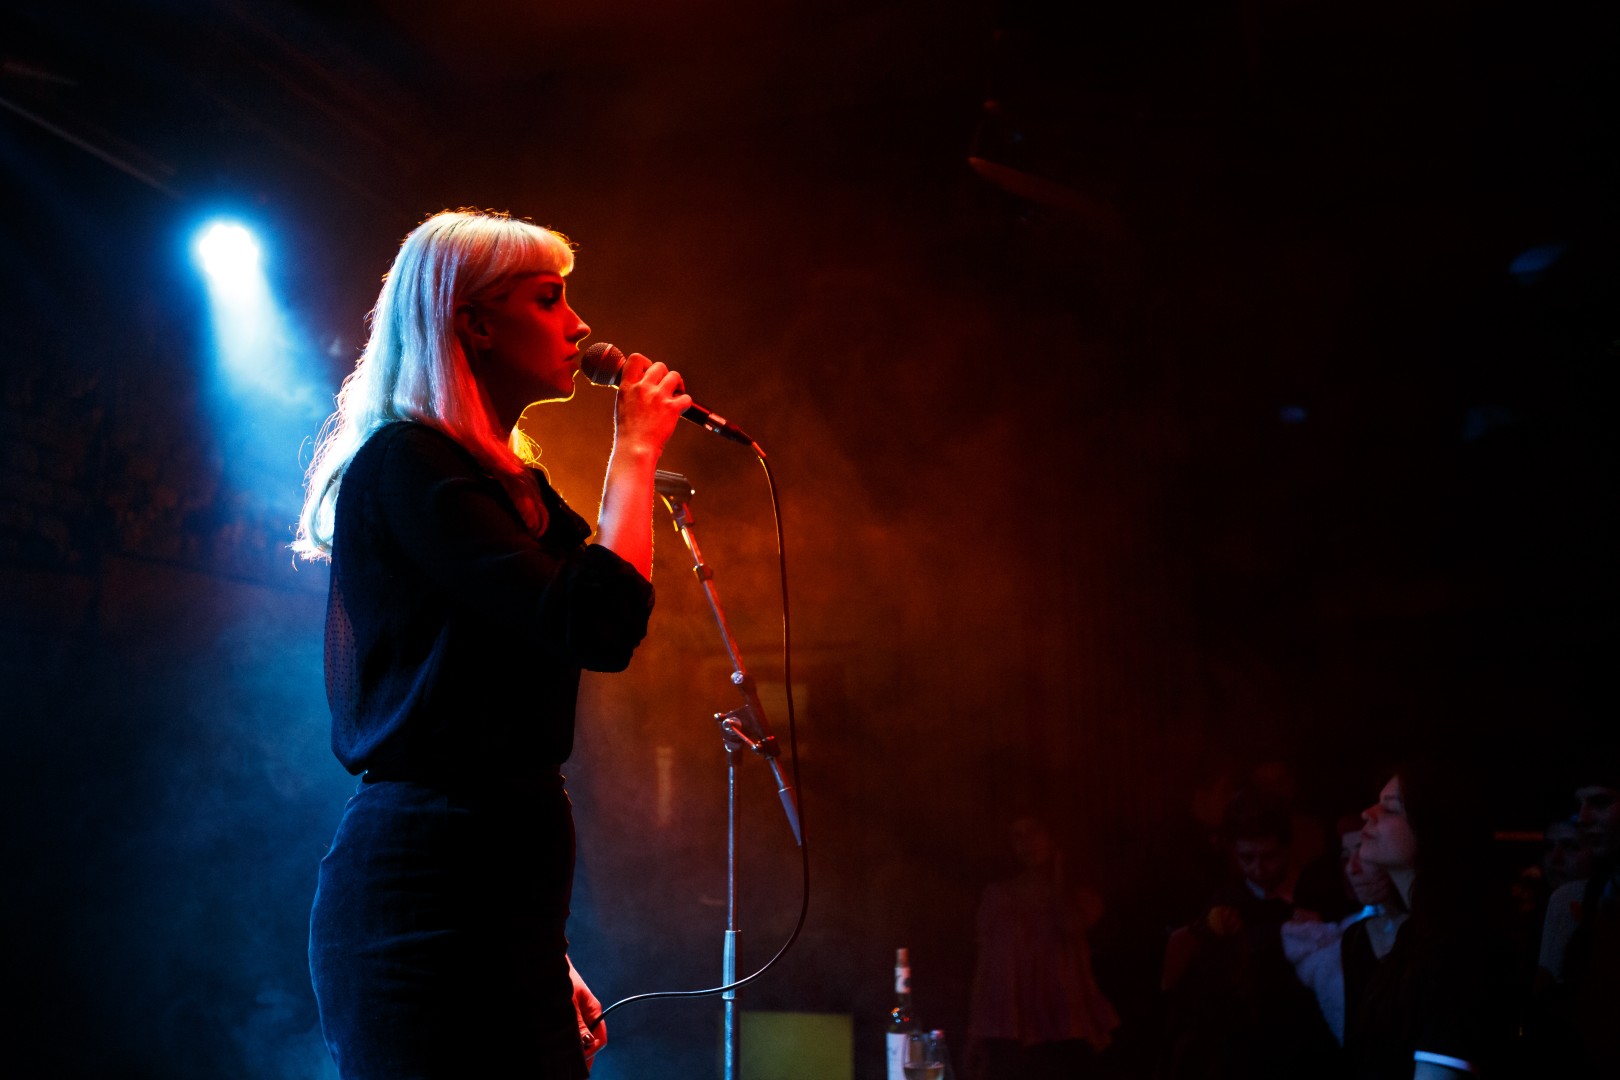 Molly Nilsson at Control Club in Bucharest on March 3, 2016 (9d3cd94261)